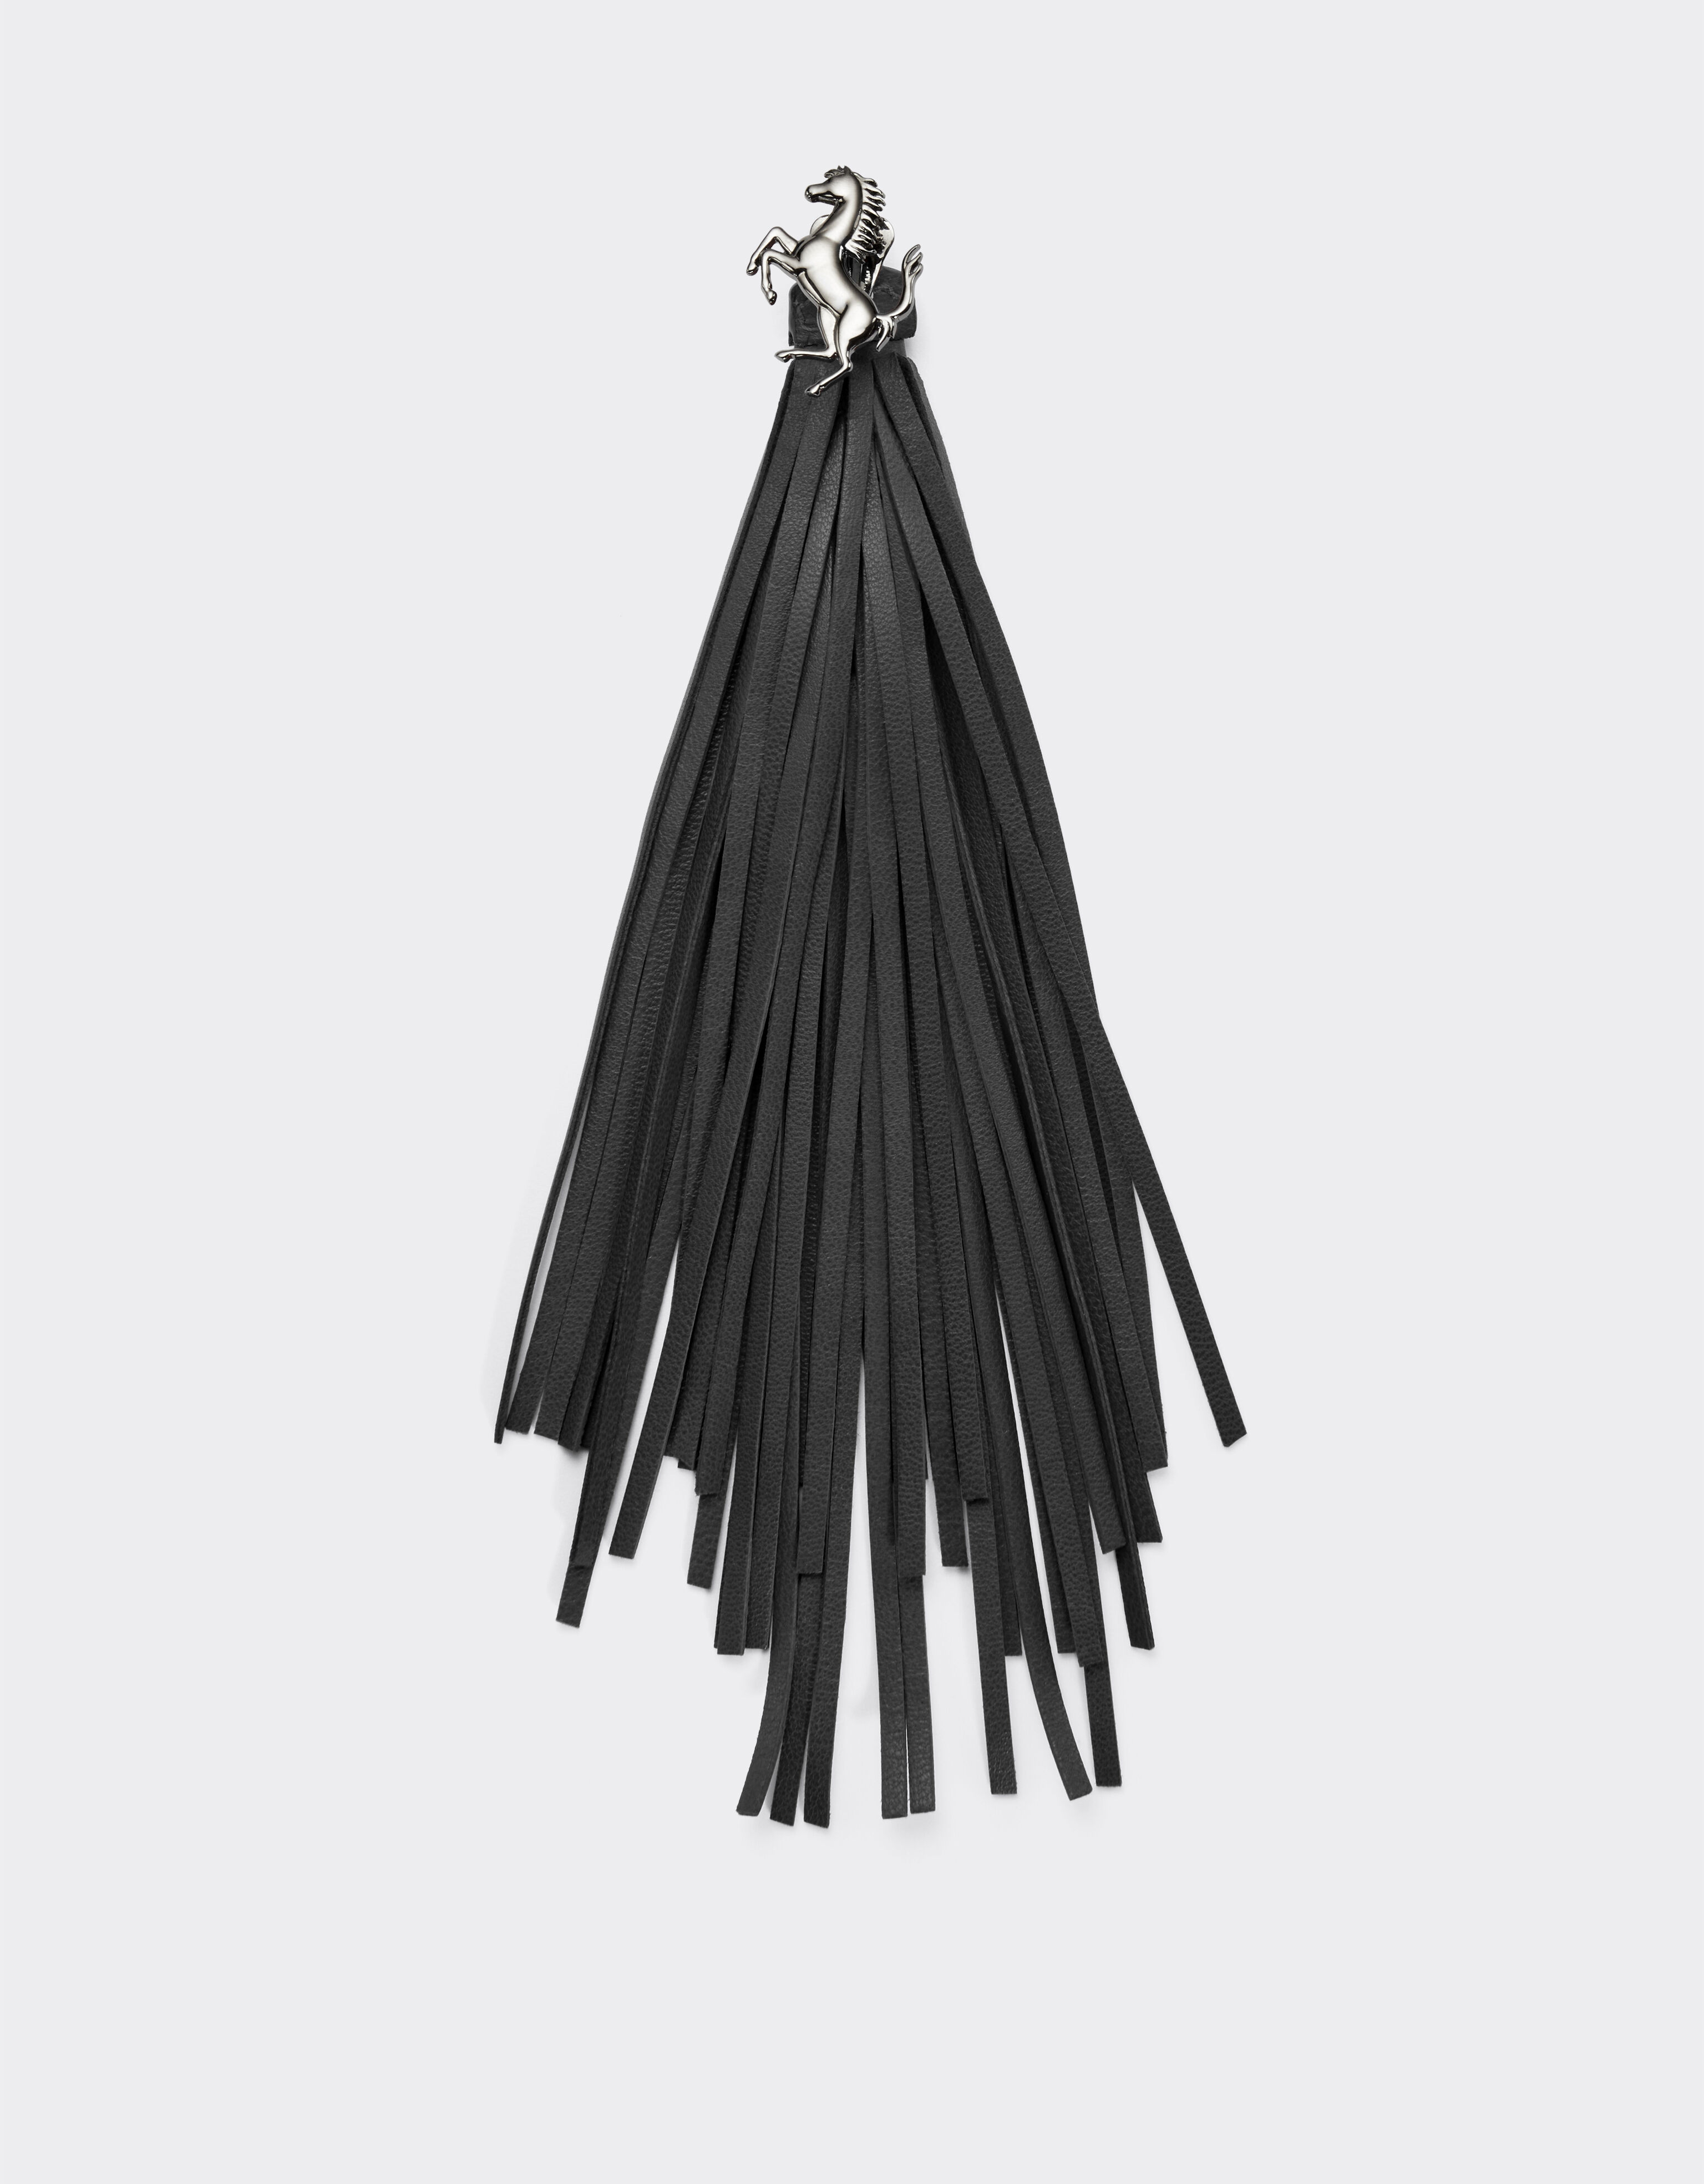 Ferrari Earrings with Prancing Horse detail and leather tassel Charcoal 20014f